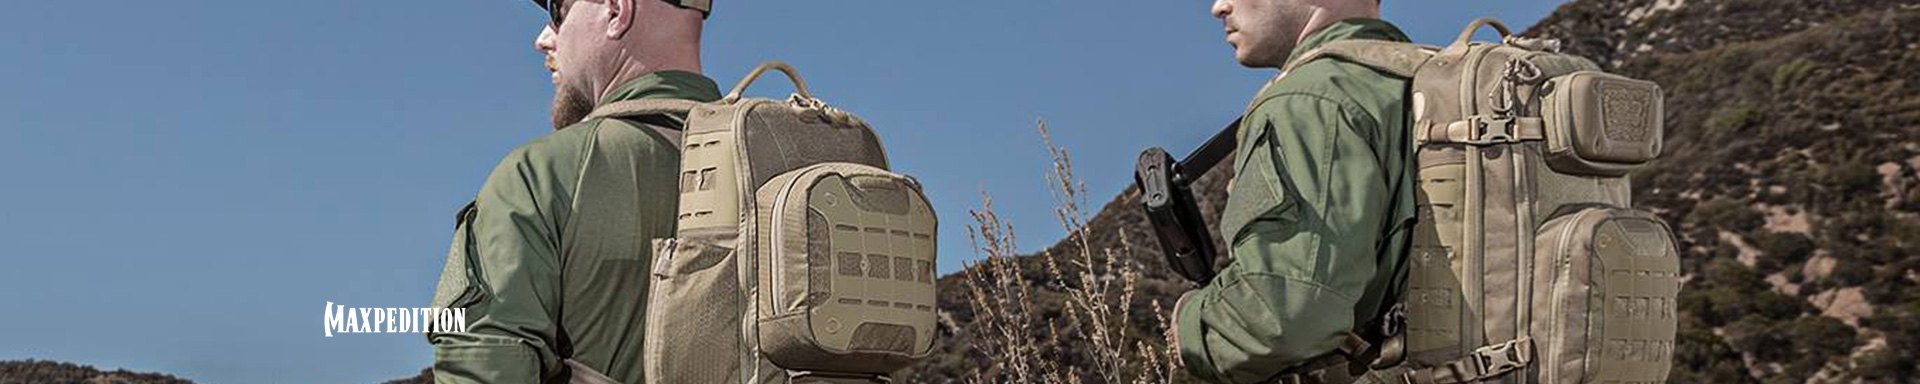 Maxpedition Tactical Pouches & Organizers